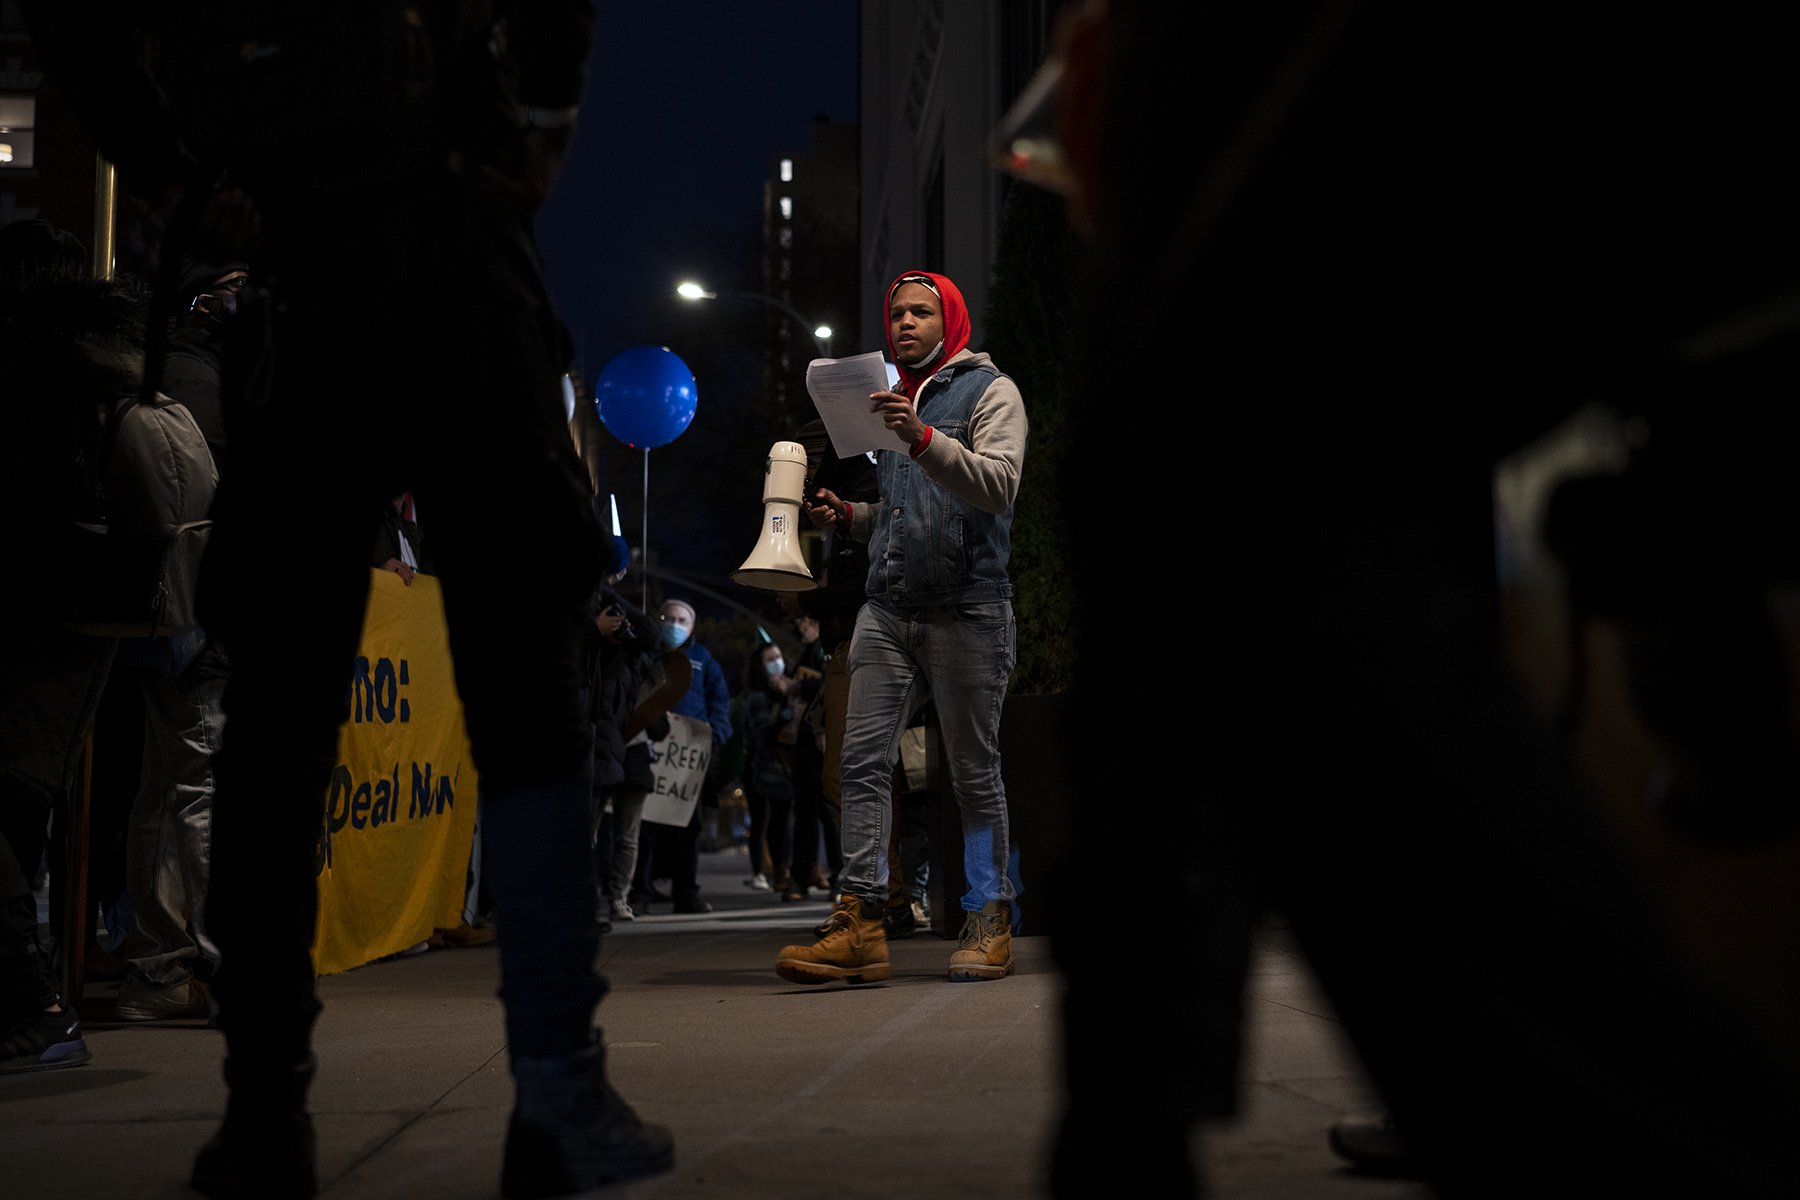 Sunrise NYC member Drake Hunt with a megaphone in front of a crowd of protesters (Photo credit: Tsubasa Berg)